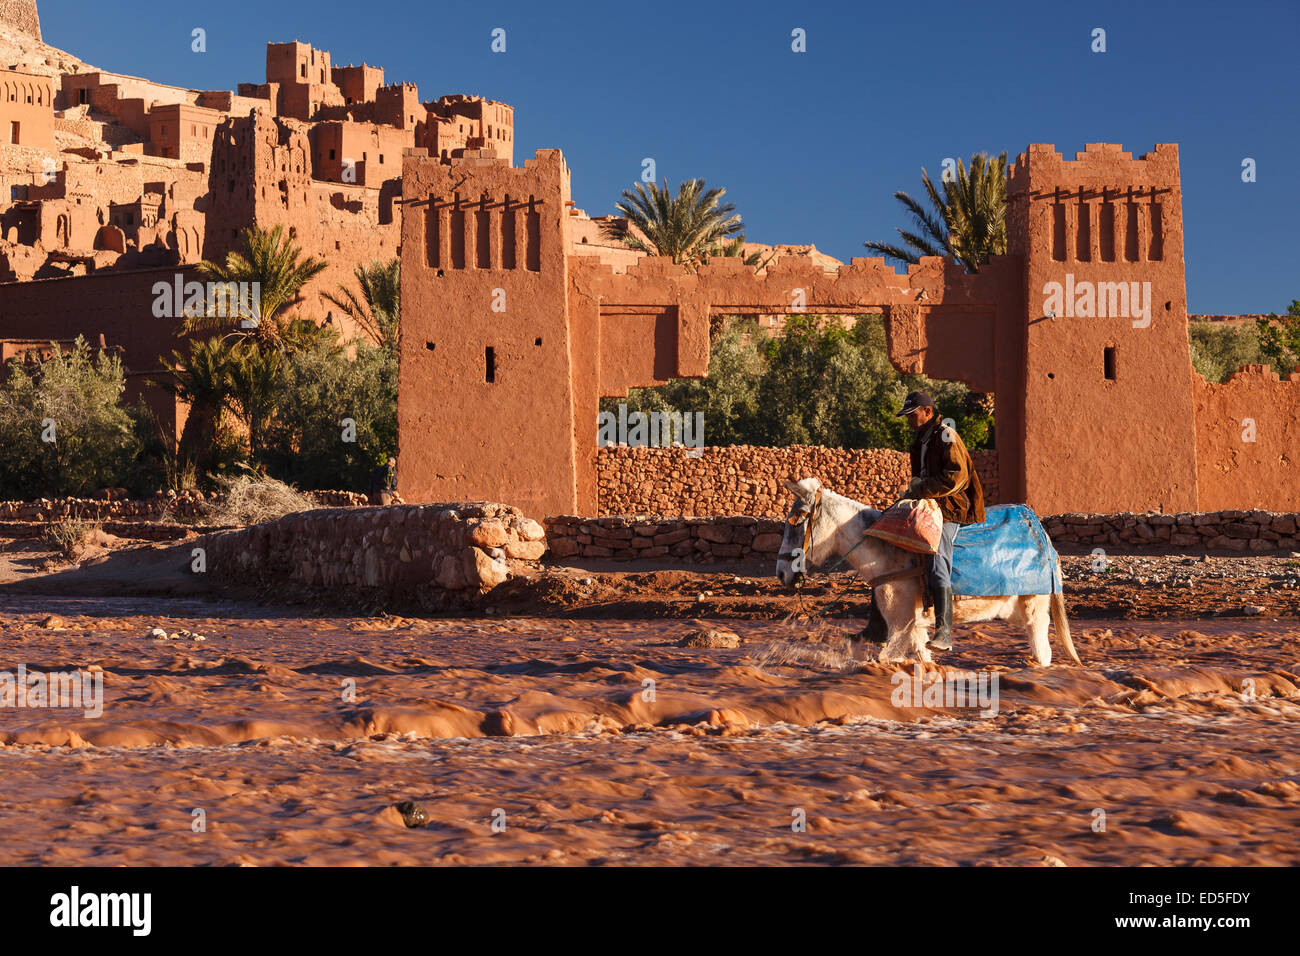 Donkey and Ait ben haddou. Atlas mountian. Morocco. North Africa. Africa Stock Photo